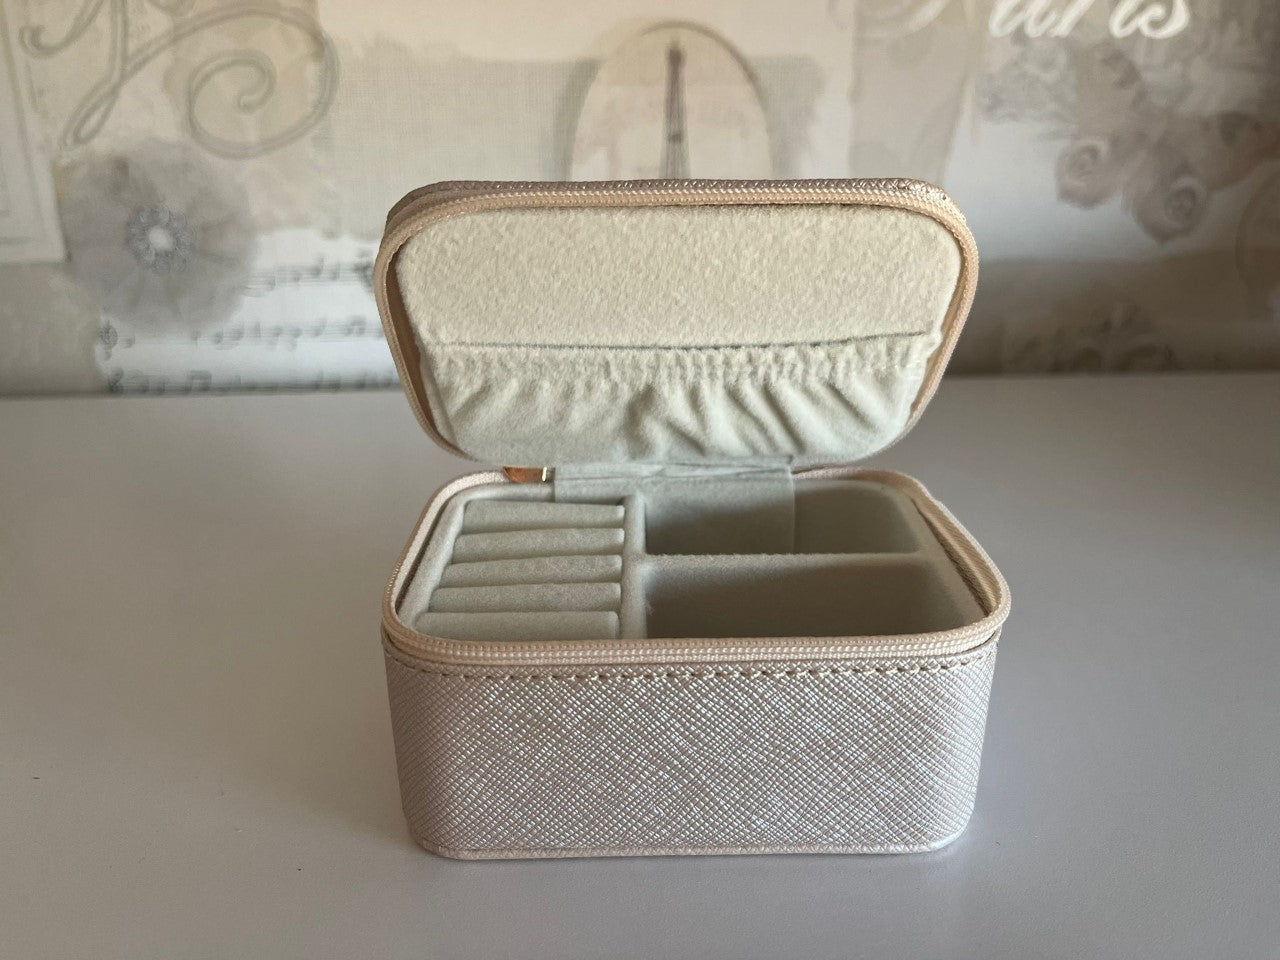 Personalised Jewellery box - be the hero in your own life story Eleanor